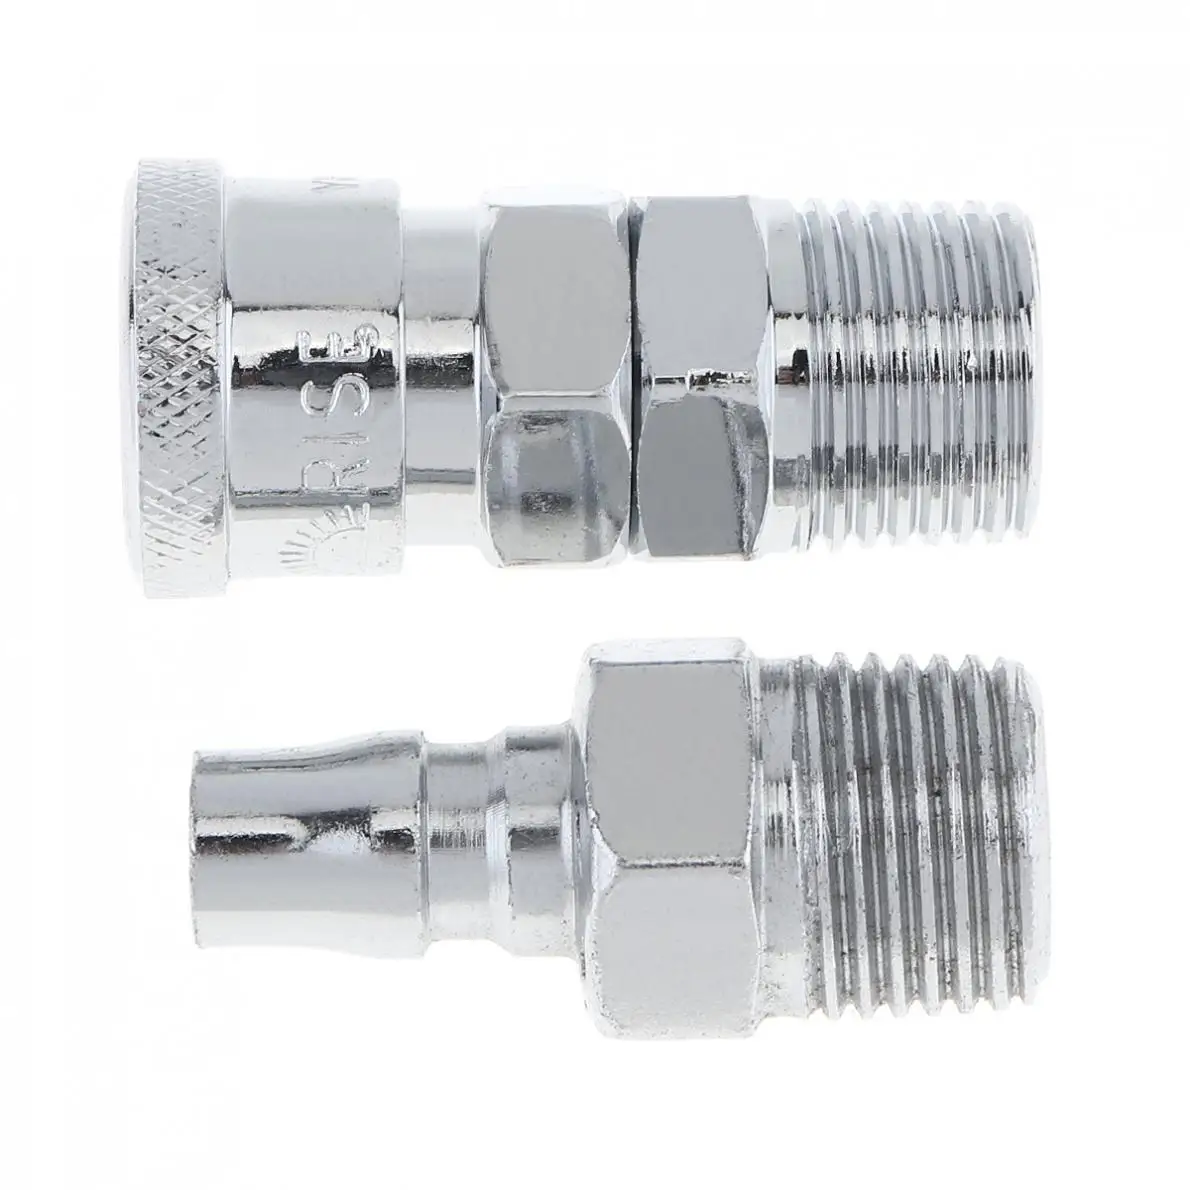 

2pcs/lot Silver TL-S12 40SM+PM High Speed Steel Pneumatic Fitting Quick High Pressure Connector